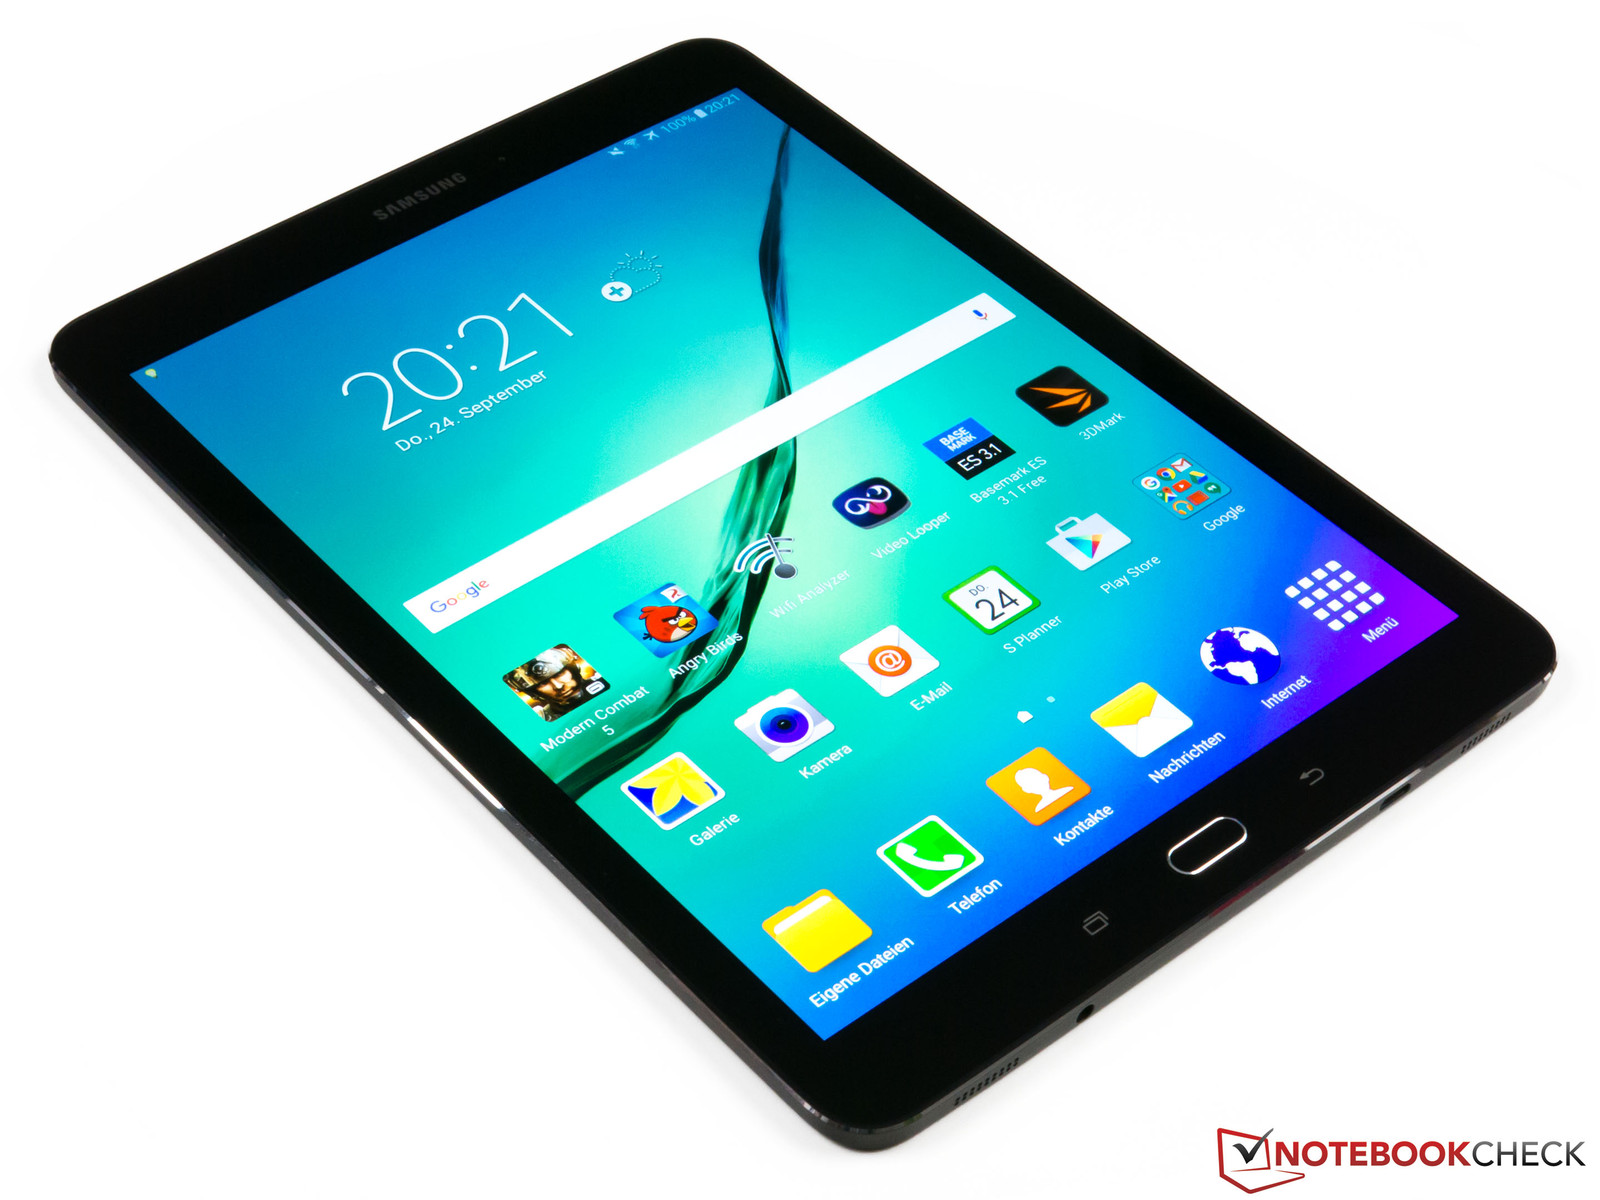 Samsung temporarily cuts Galaxy Tab S2 prices by 100 Euros ...